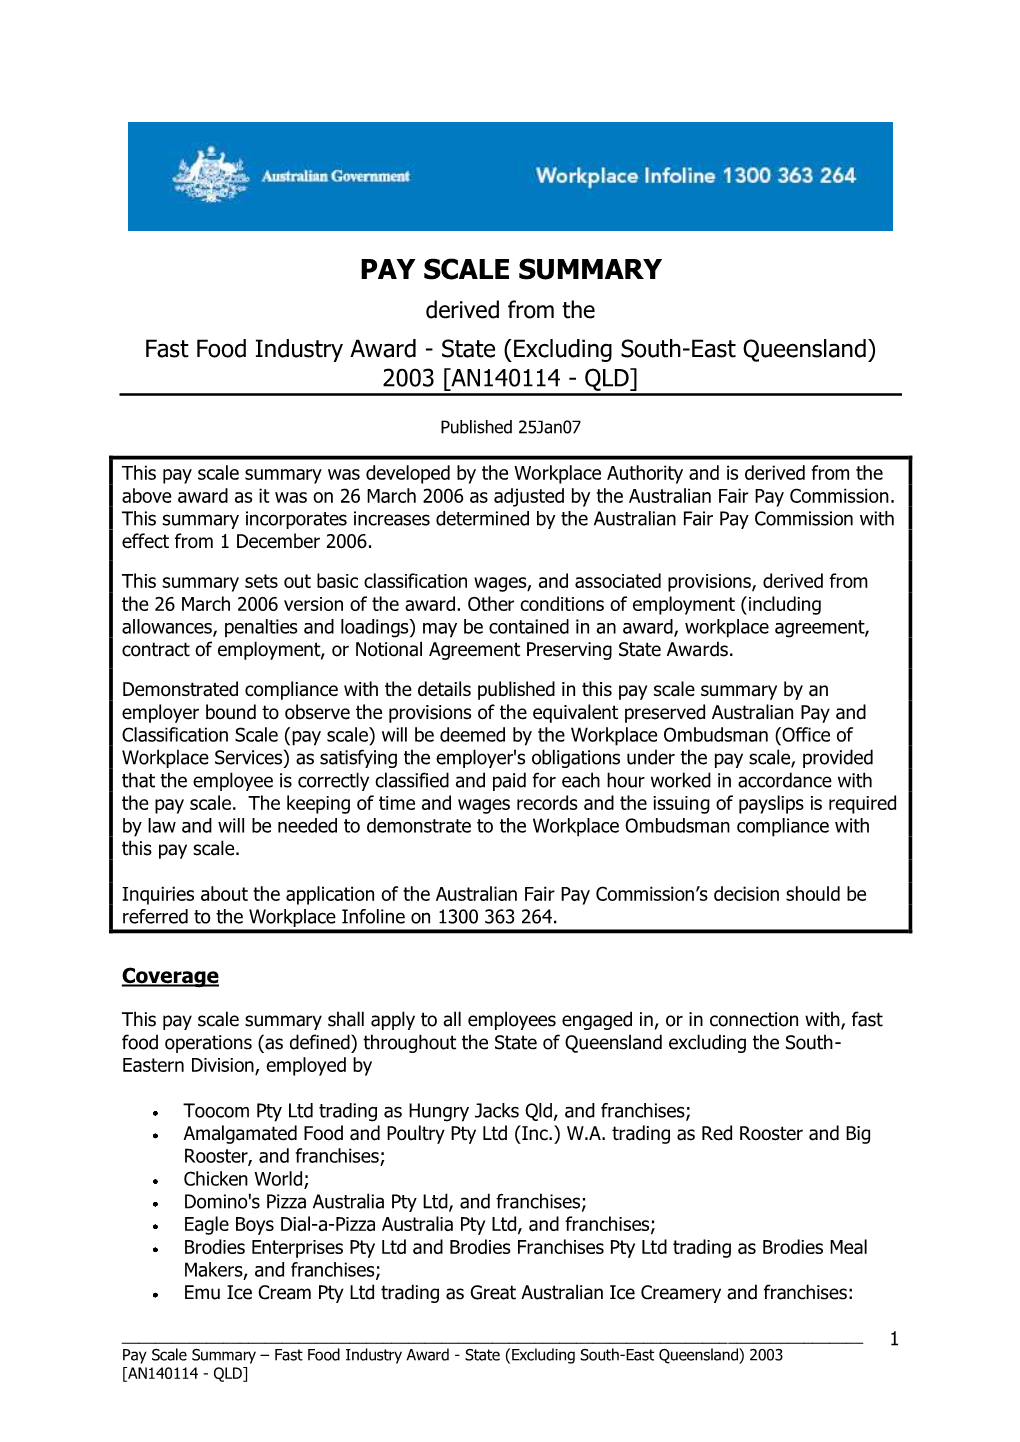 PAY SCALE SUMMARY Derived from the Fast Food Industry Award - State (Excluding South-East Queensland) 2003 [AN140114 - QLD]